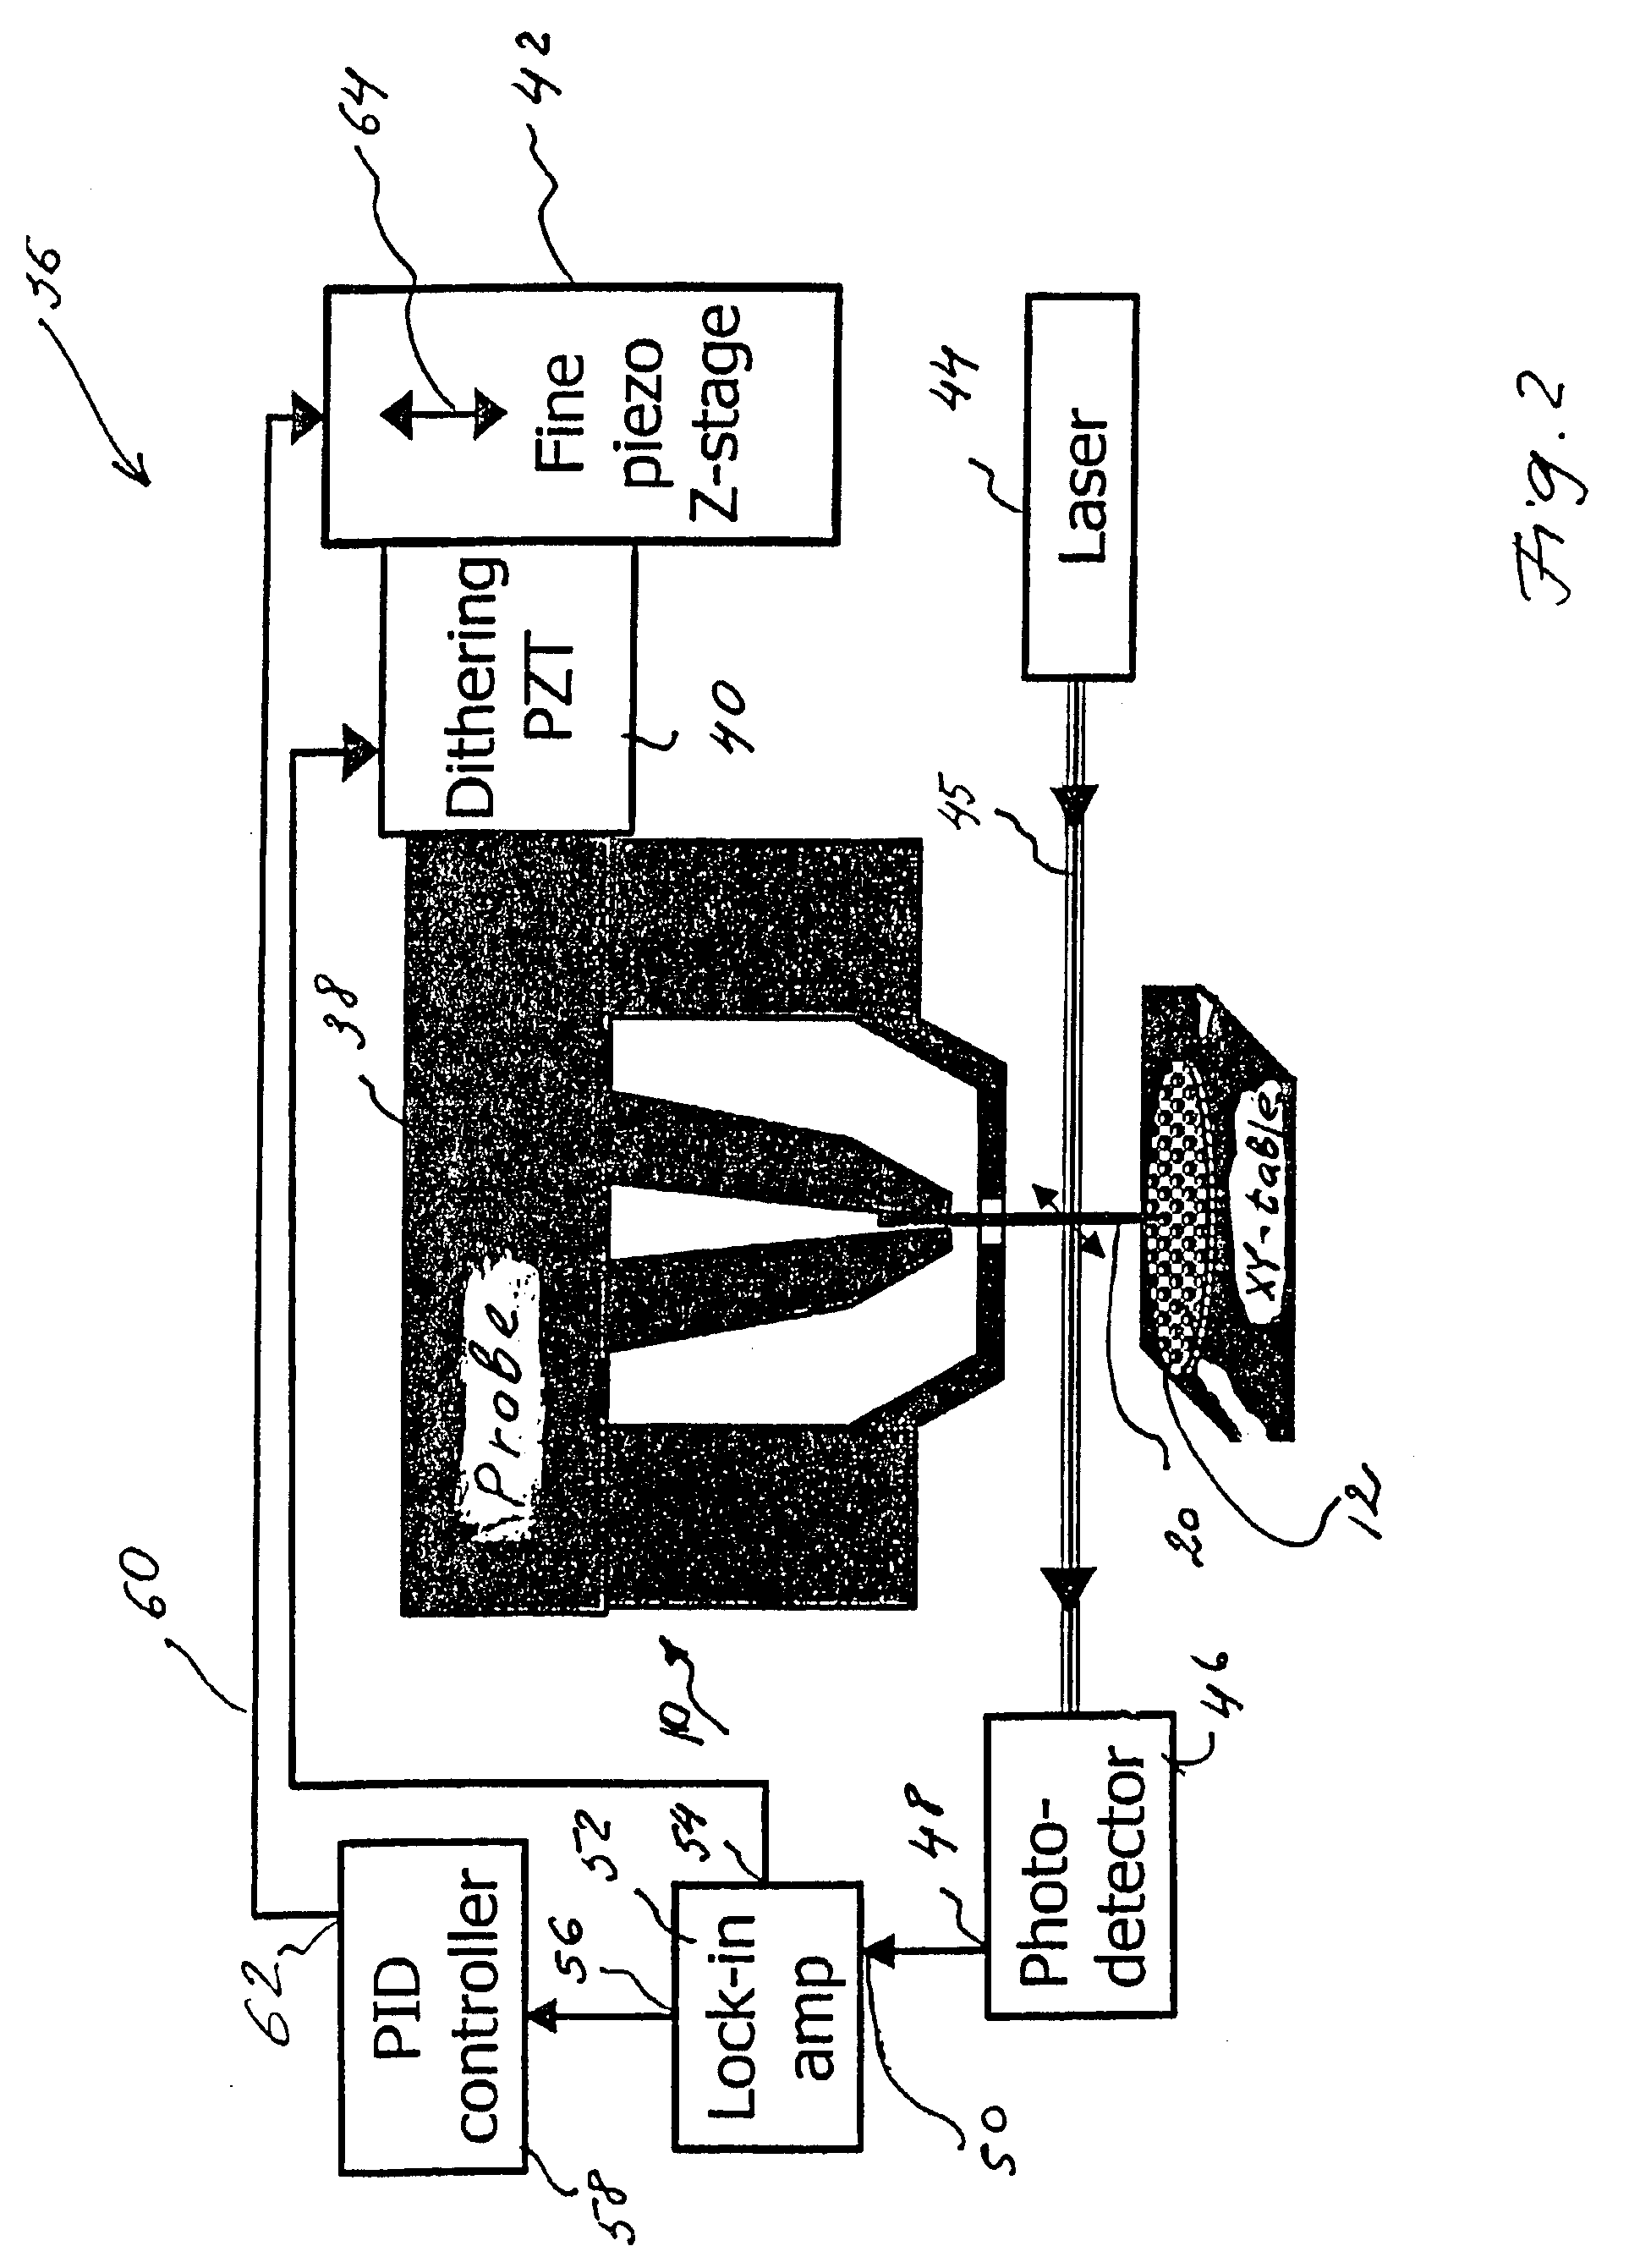 System and method for quantitative measurements of a material's complex permittivity with use of near-field microwave probes